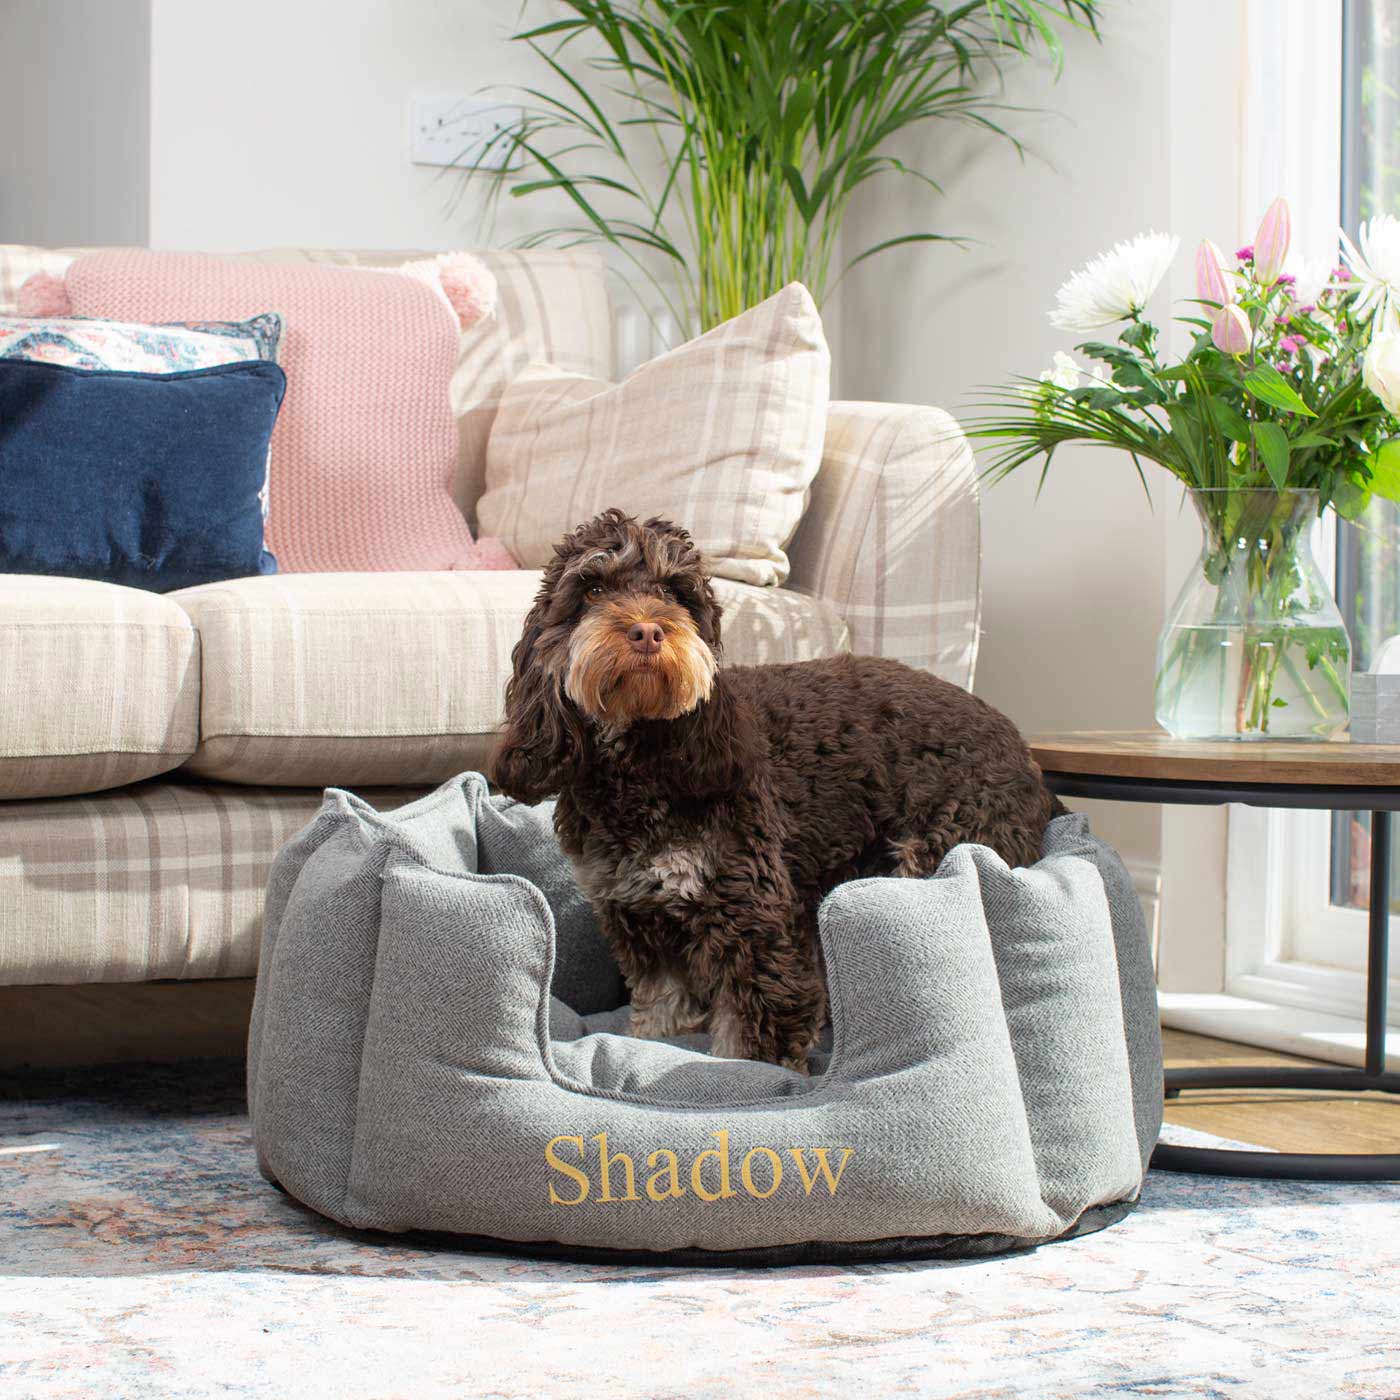 Discover Our Luxurious High Wall Bed For Dogs, Featuring inner pillow with plush teddy fleece on one side To Craft The Perfect Dogs Bed In Stunning Pewter Herringbone Tweed! Available To Personalise Now at Lords & Labradors    